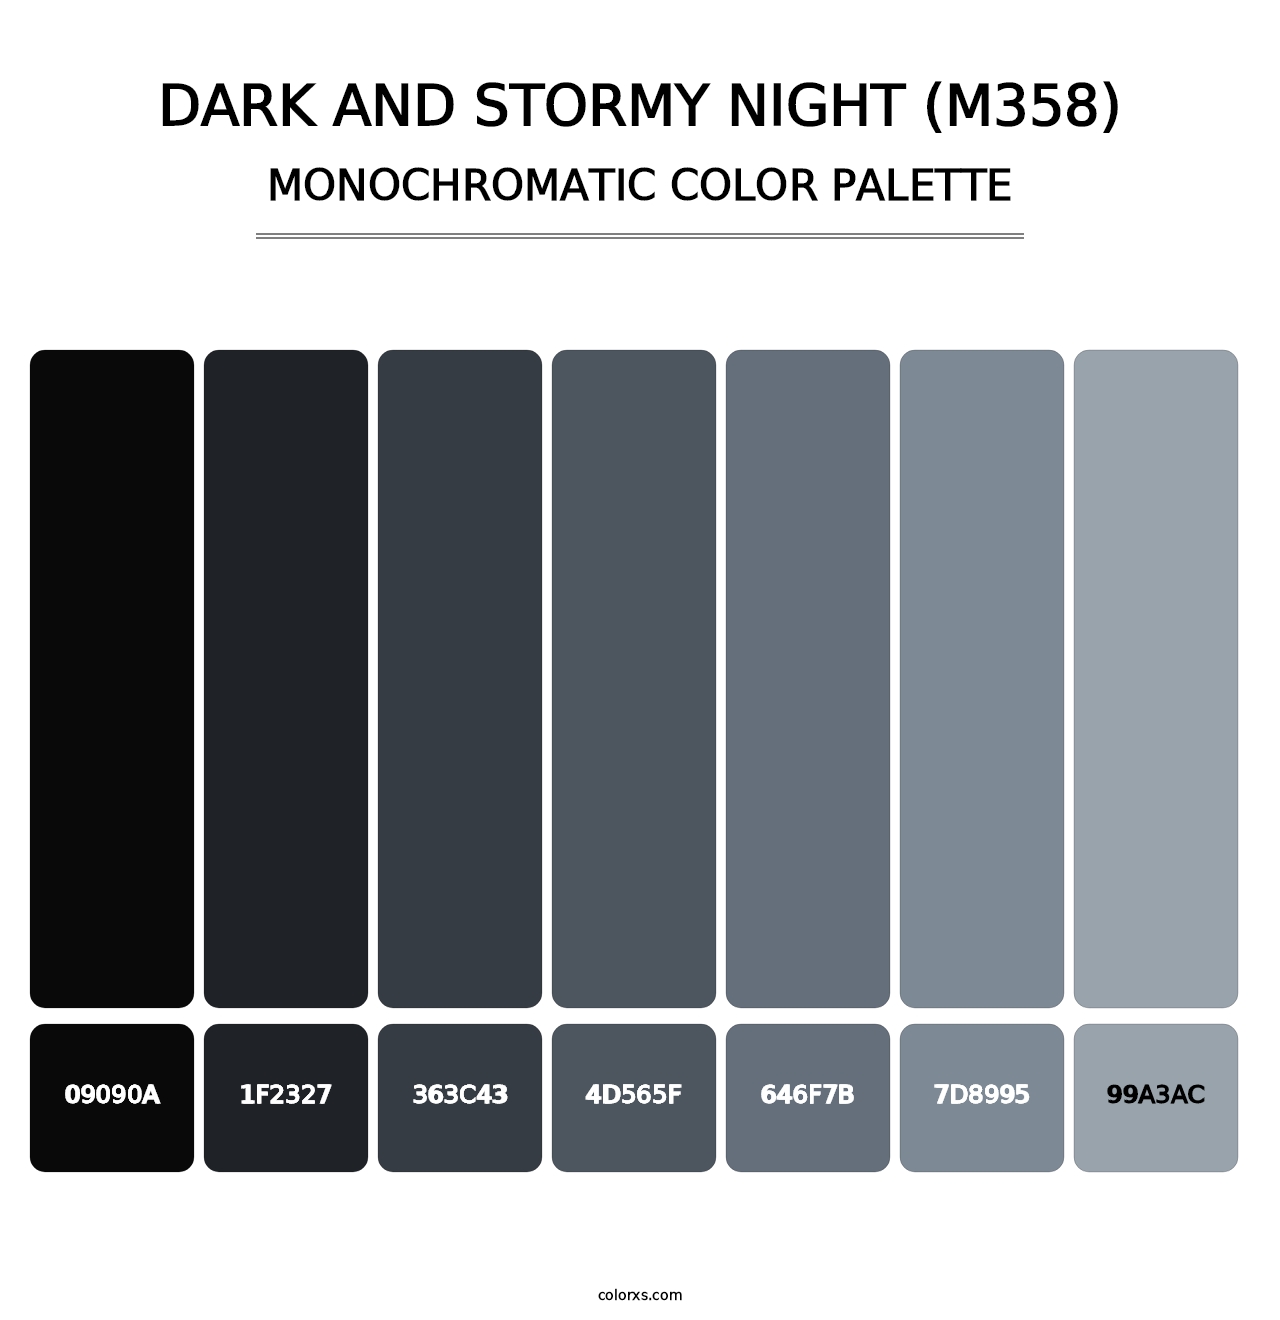 Dark and Stormy Night (M358) - Monochromatic Color Palette